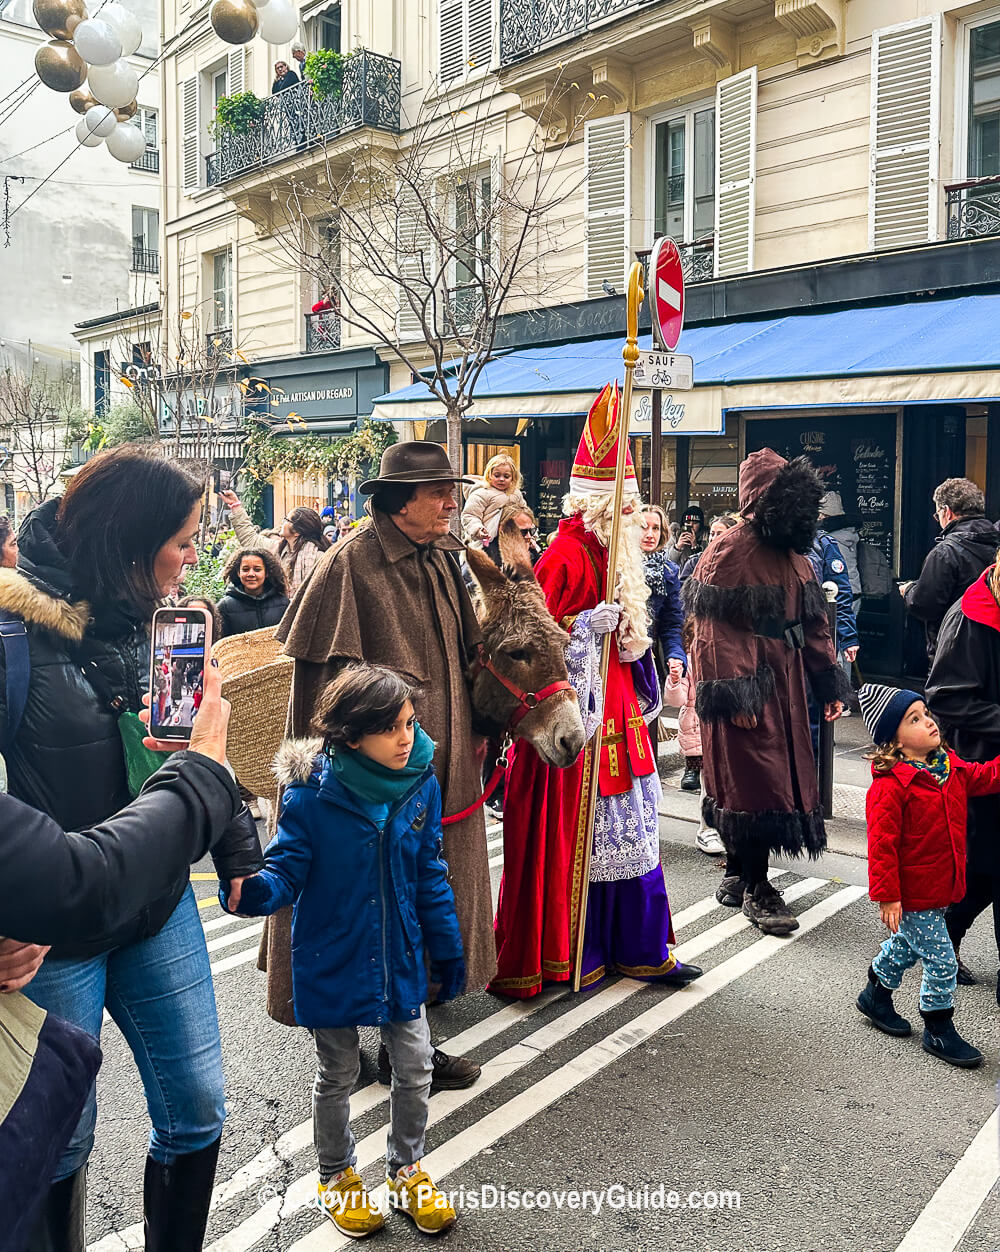 Saint Nicolas and his donkey arrive on Rue des Martyrs